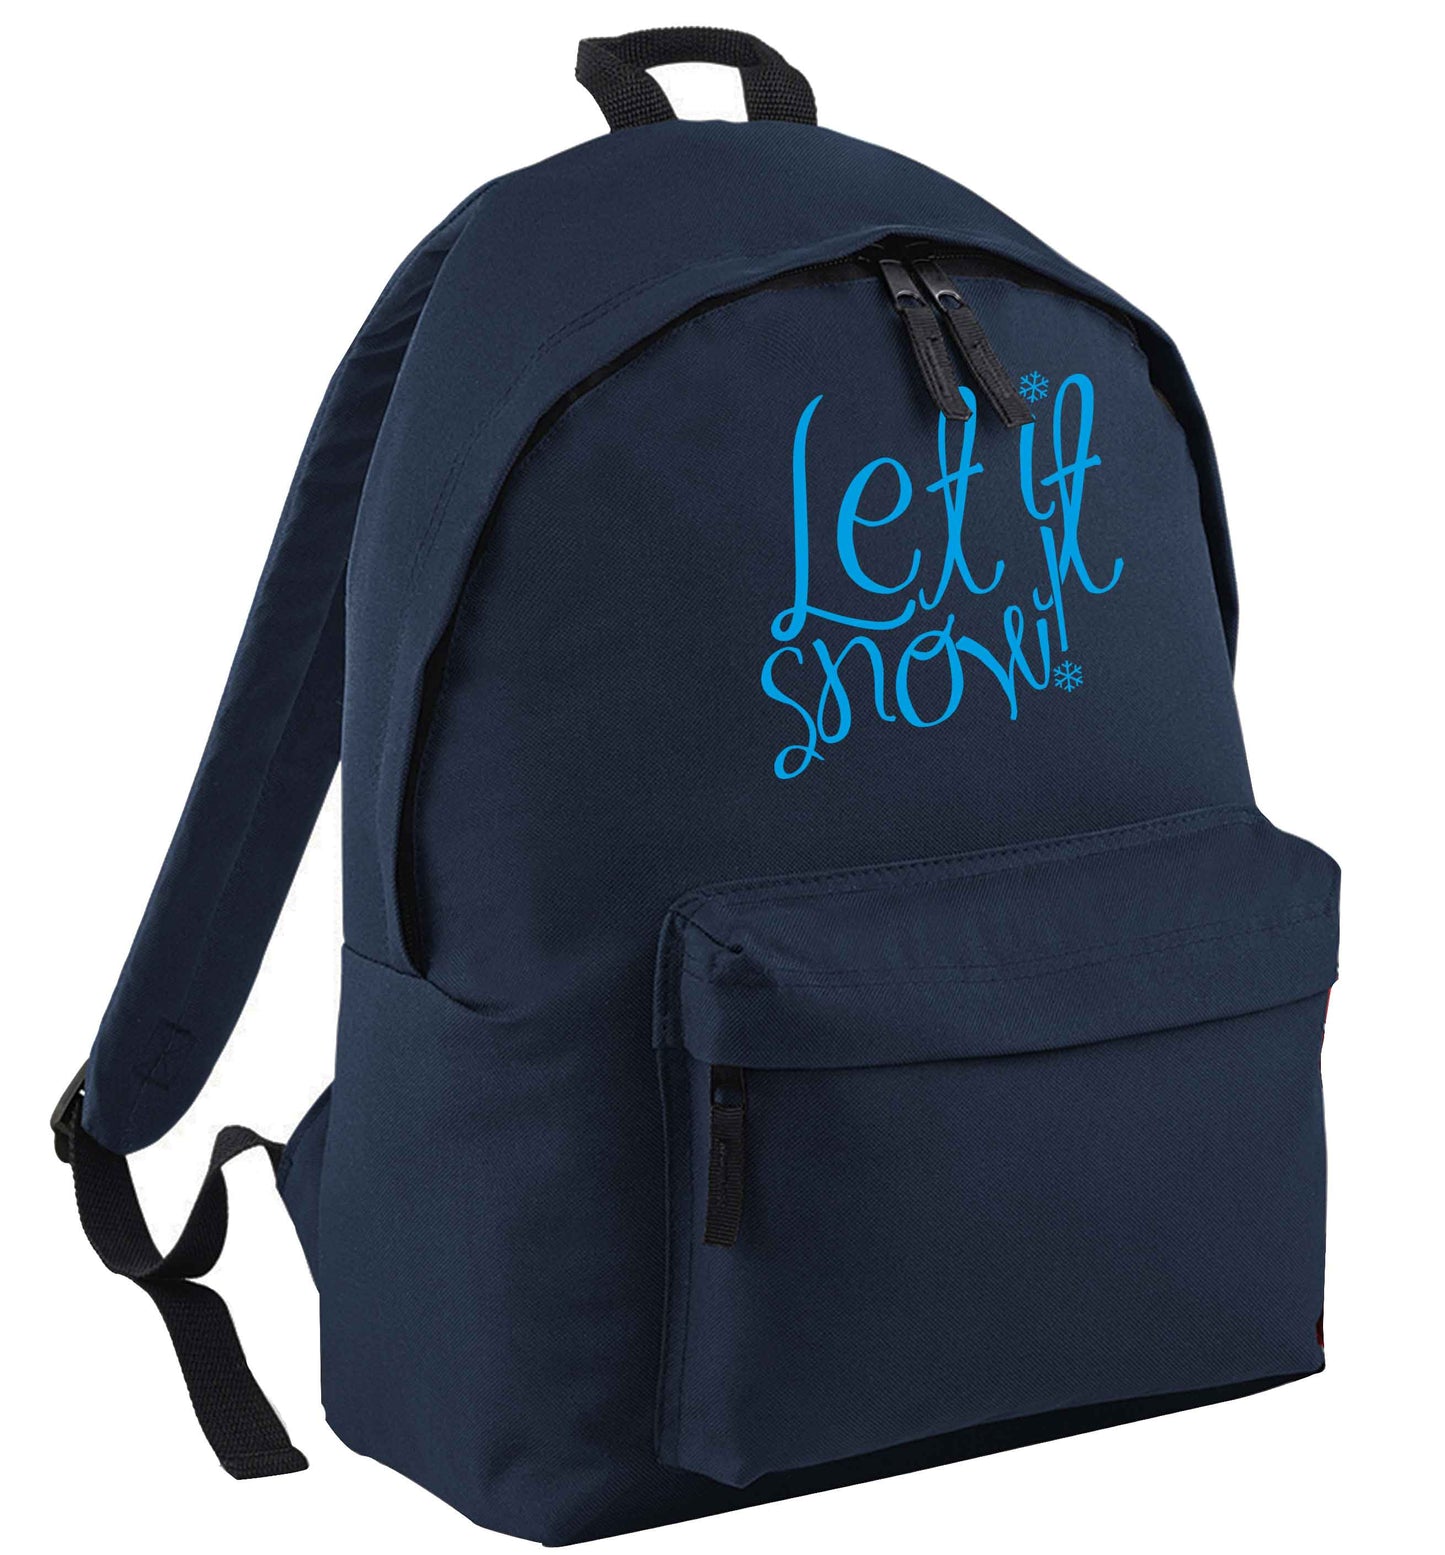 Let it snow navy adults backpack